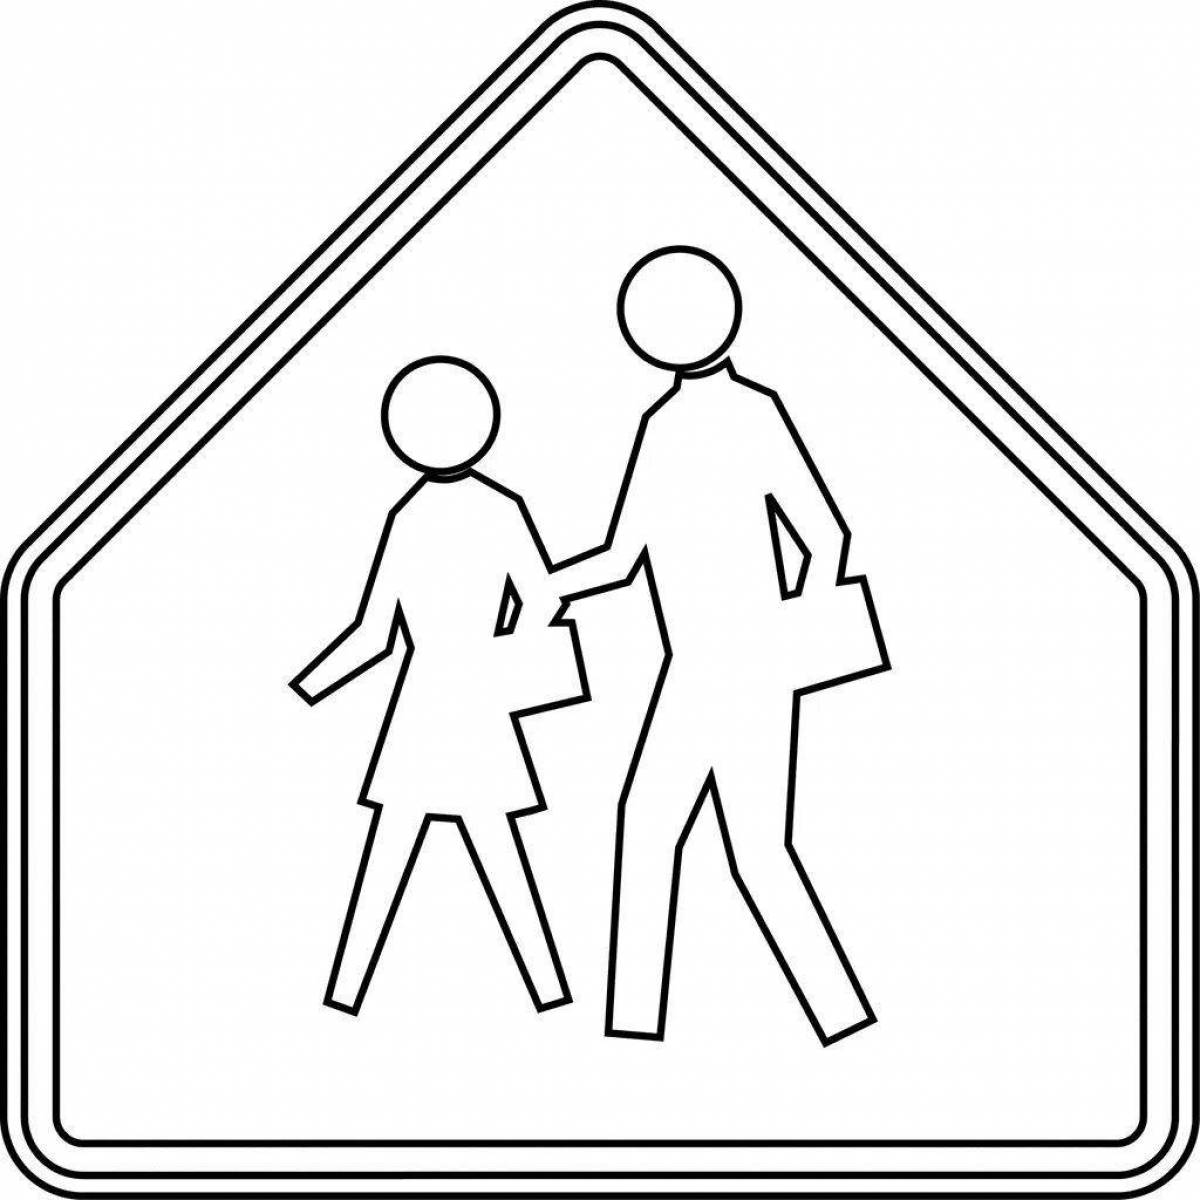 Coloring page bold no pedestrian traffic sign